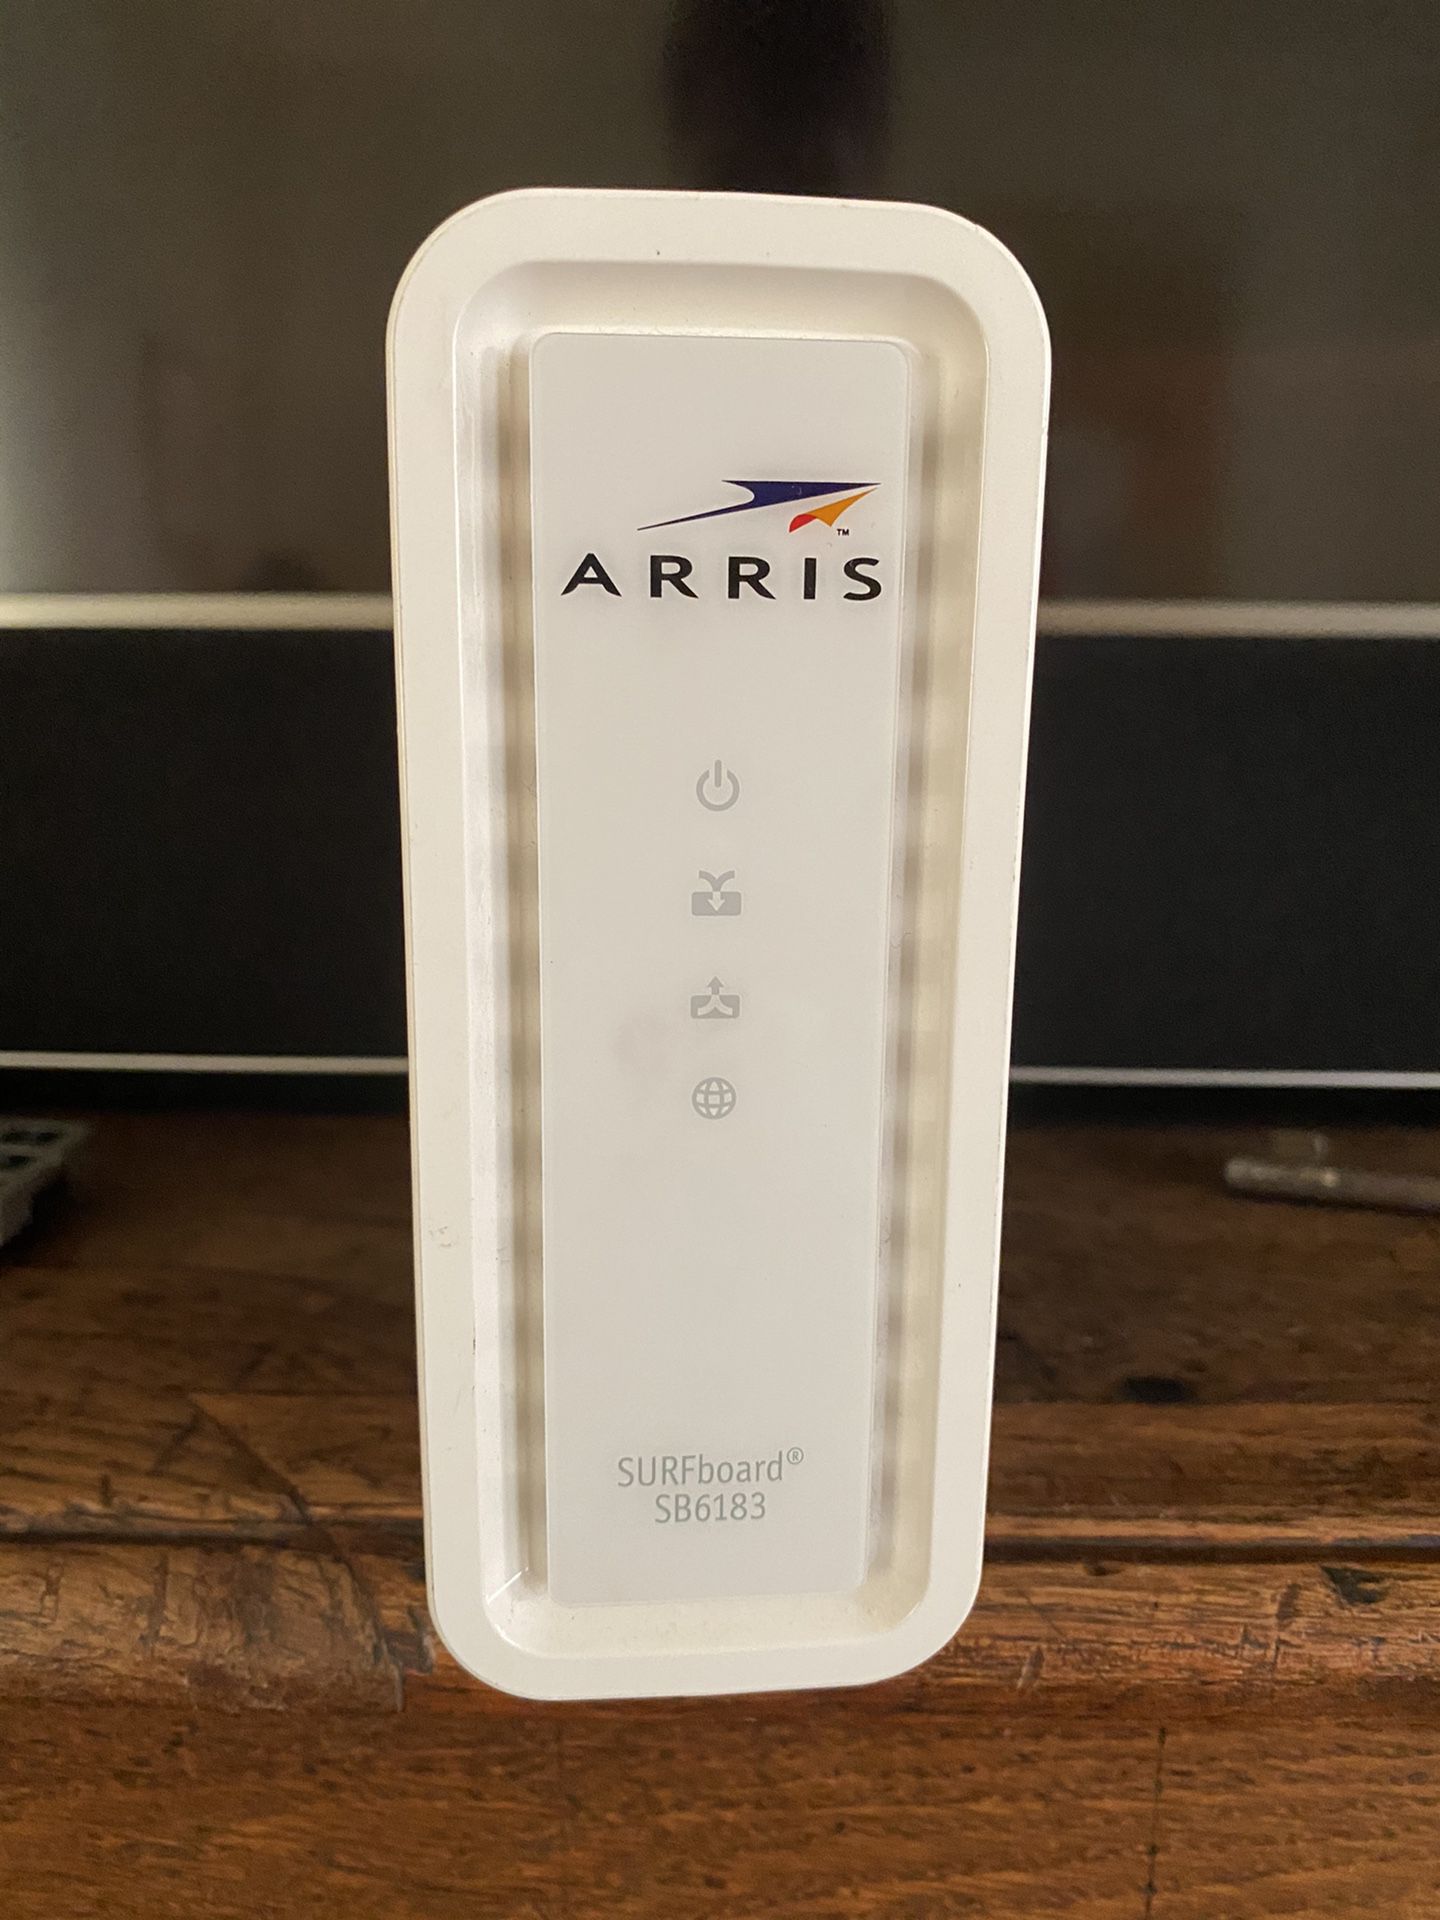 Arris 6183 Modem- Like New! Works great with Cox